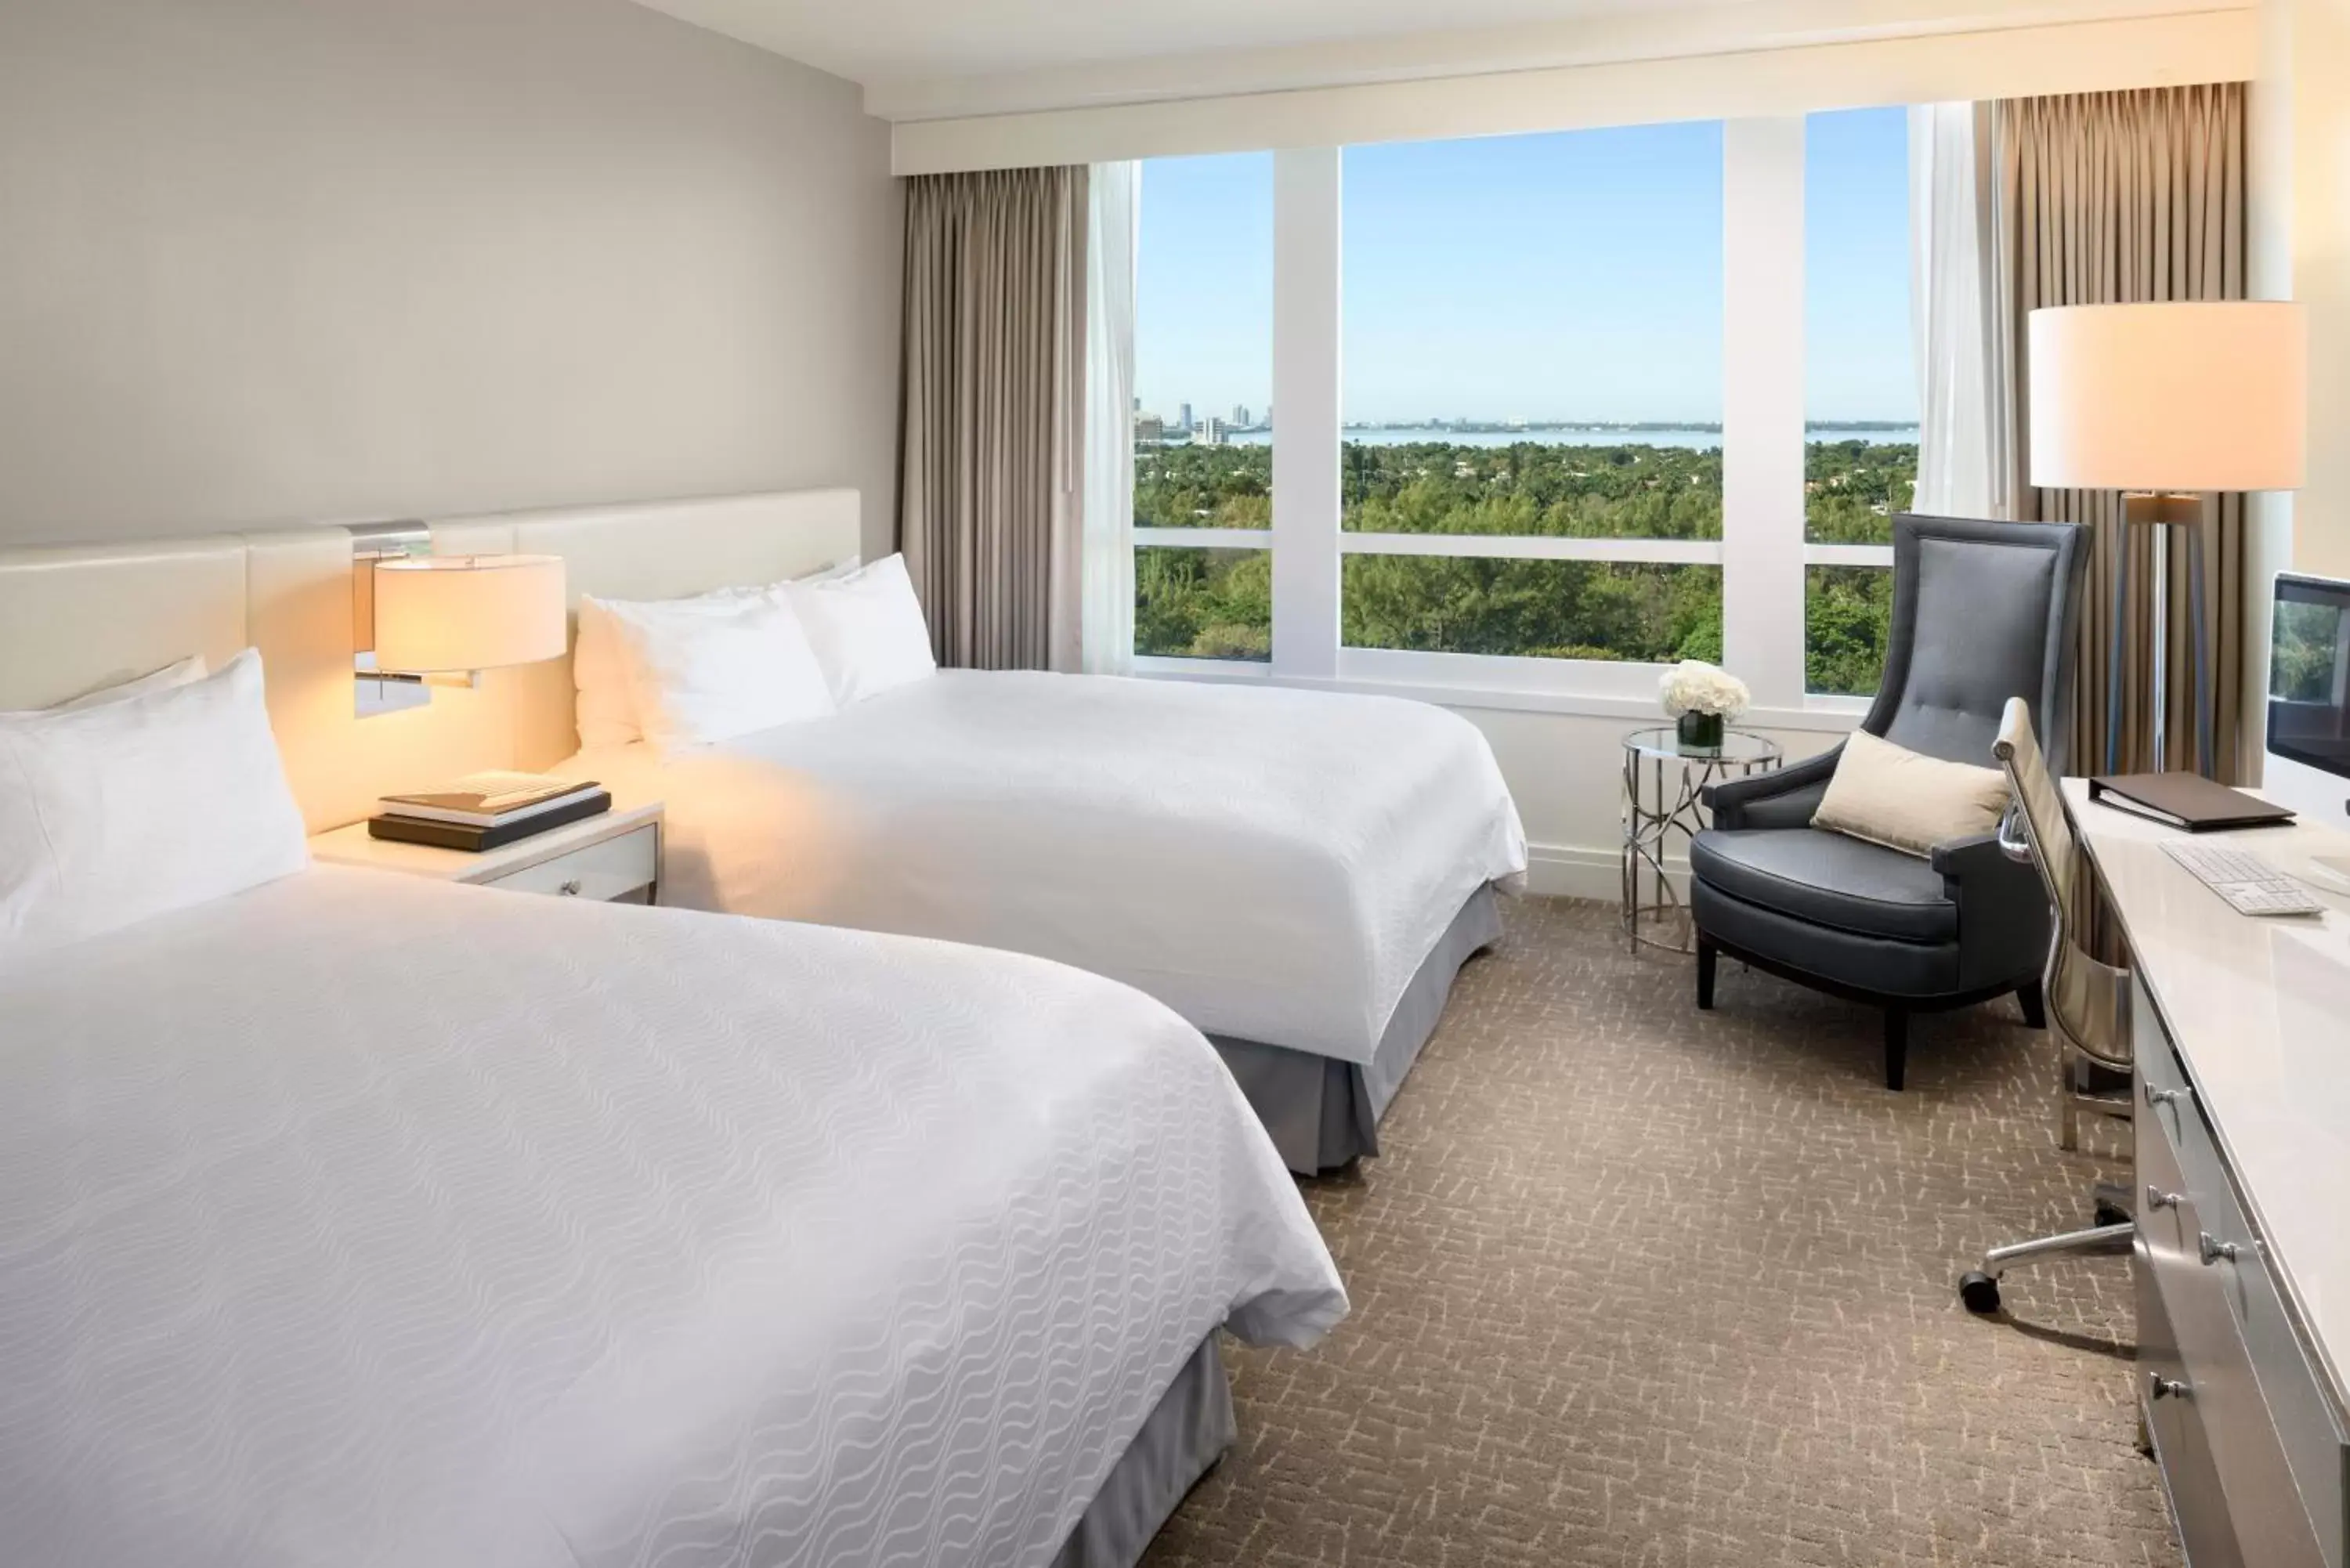 Bed, Room Photo in Fontainebleau Miami Beach